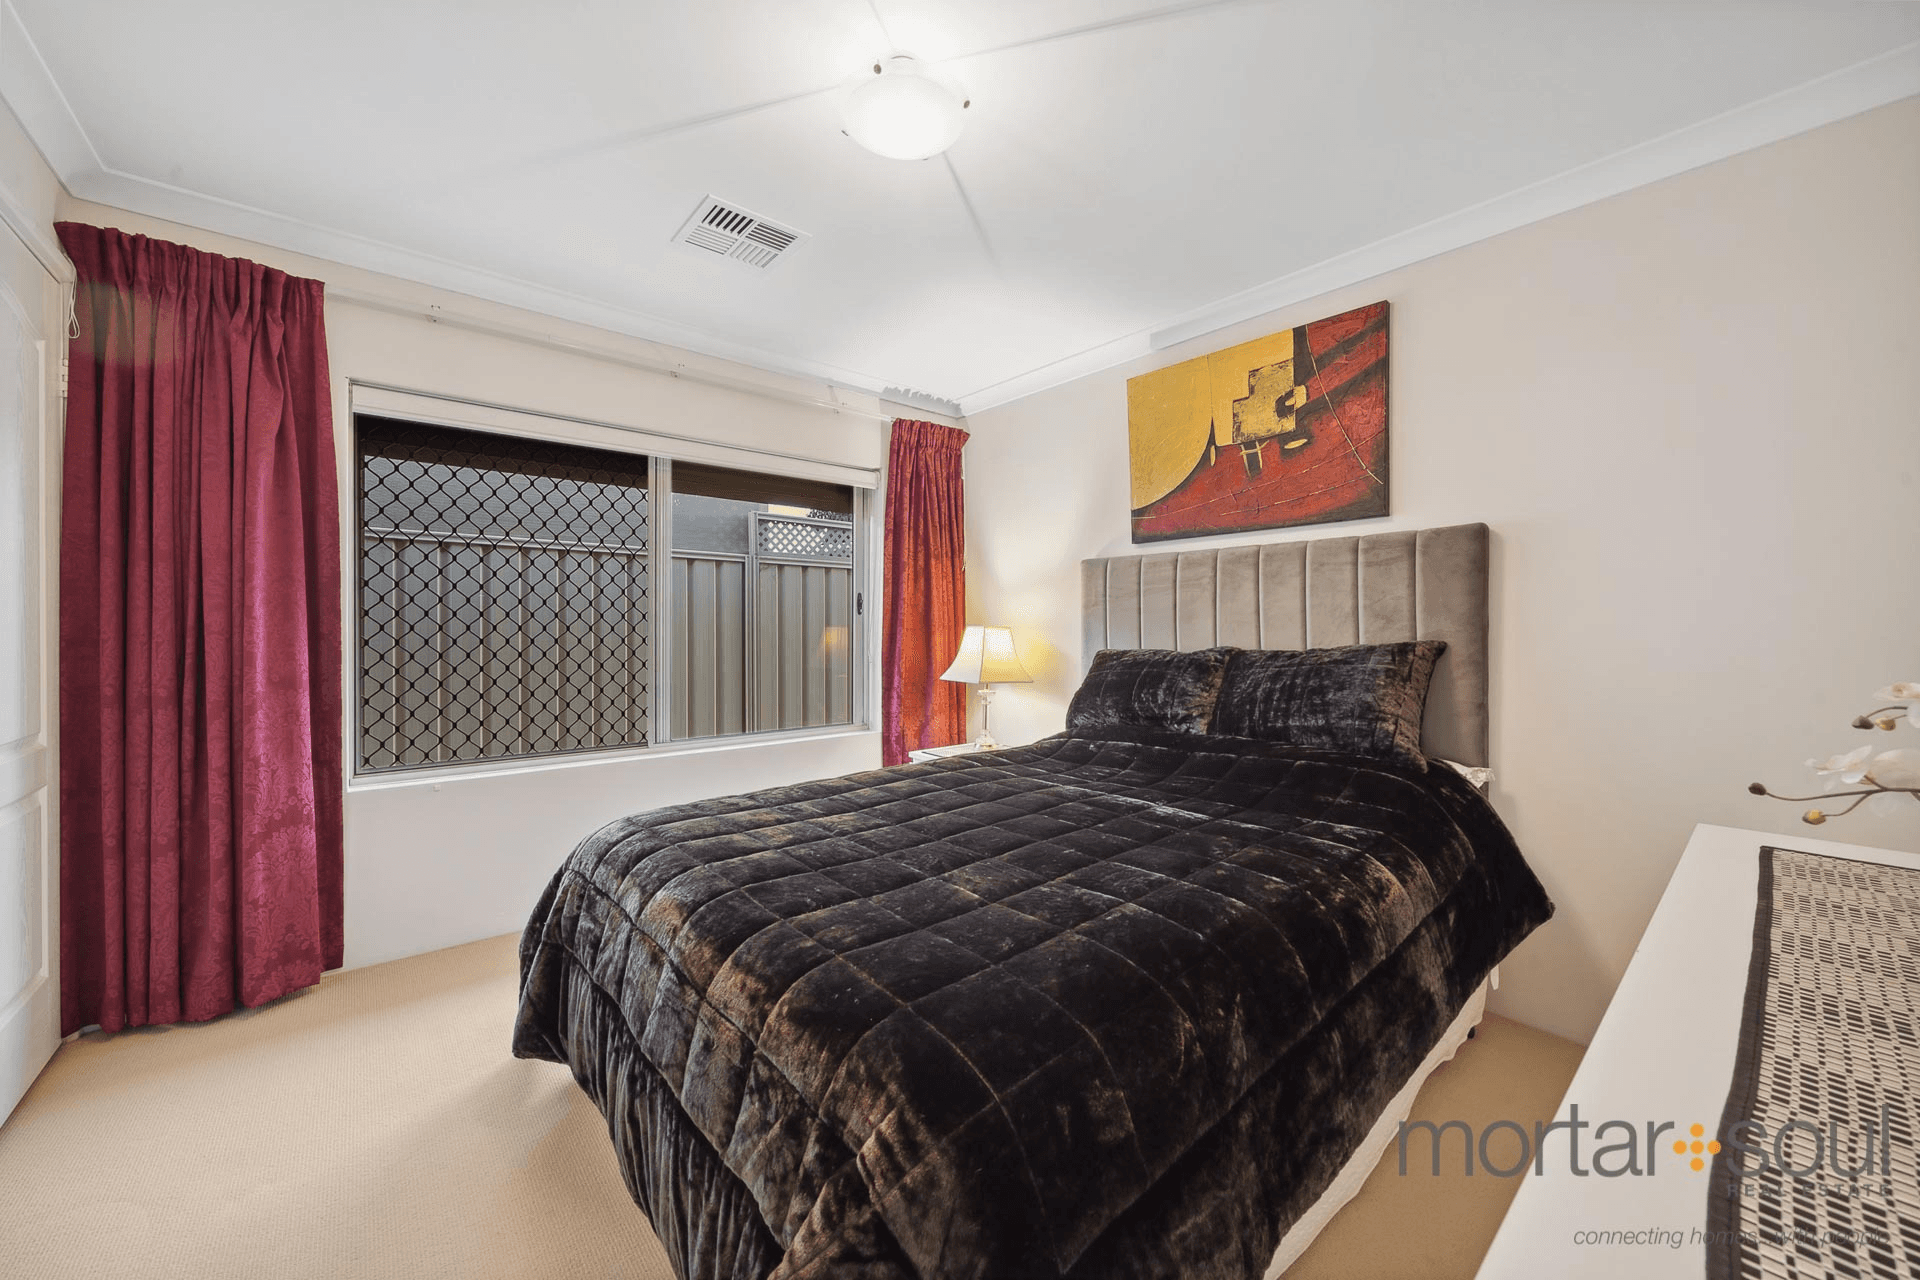 36 Brenchley Dr, Atwell, WA 6164